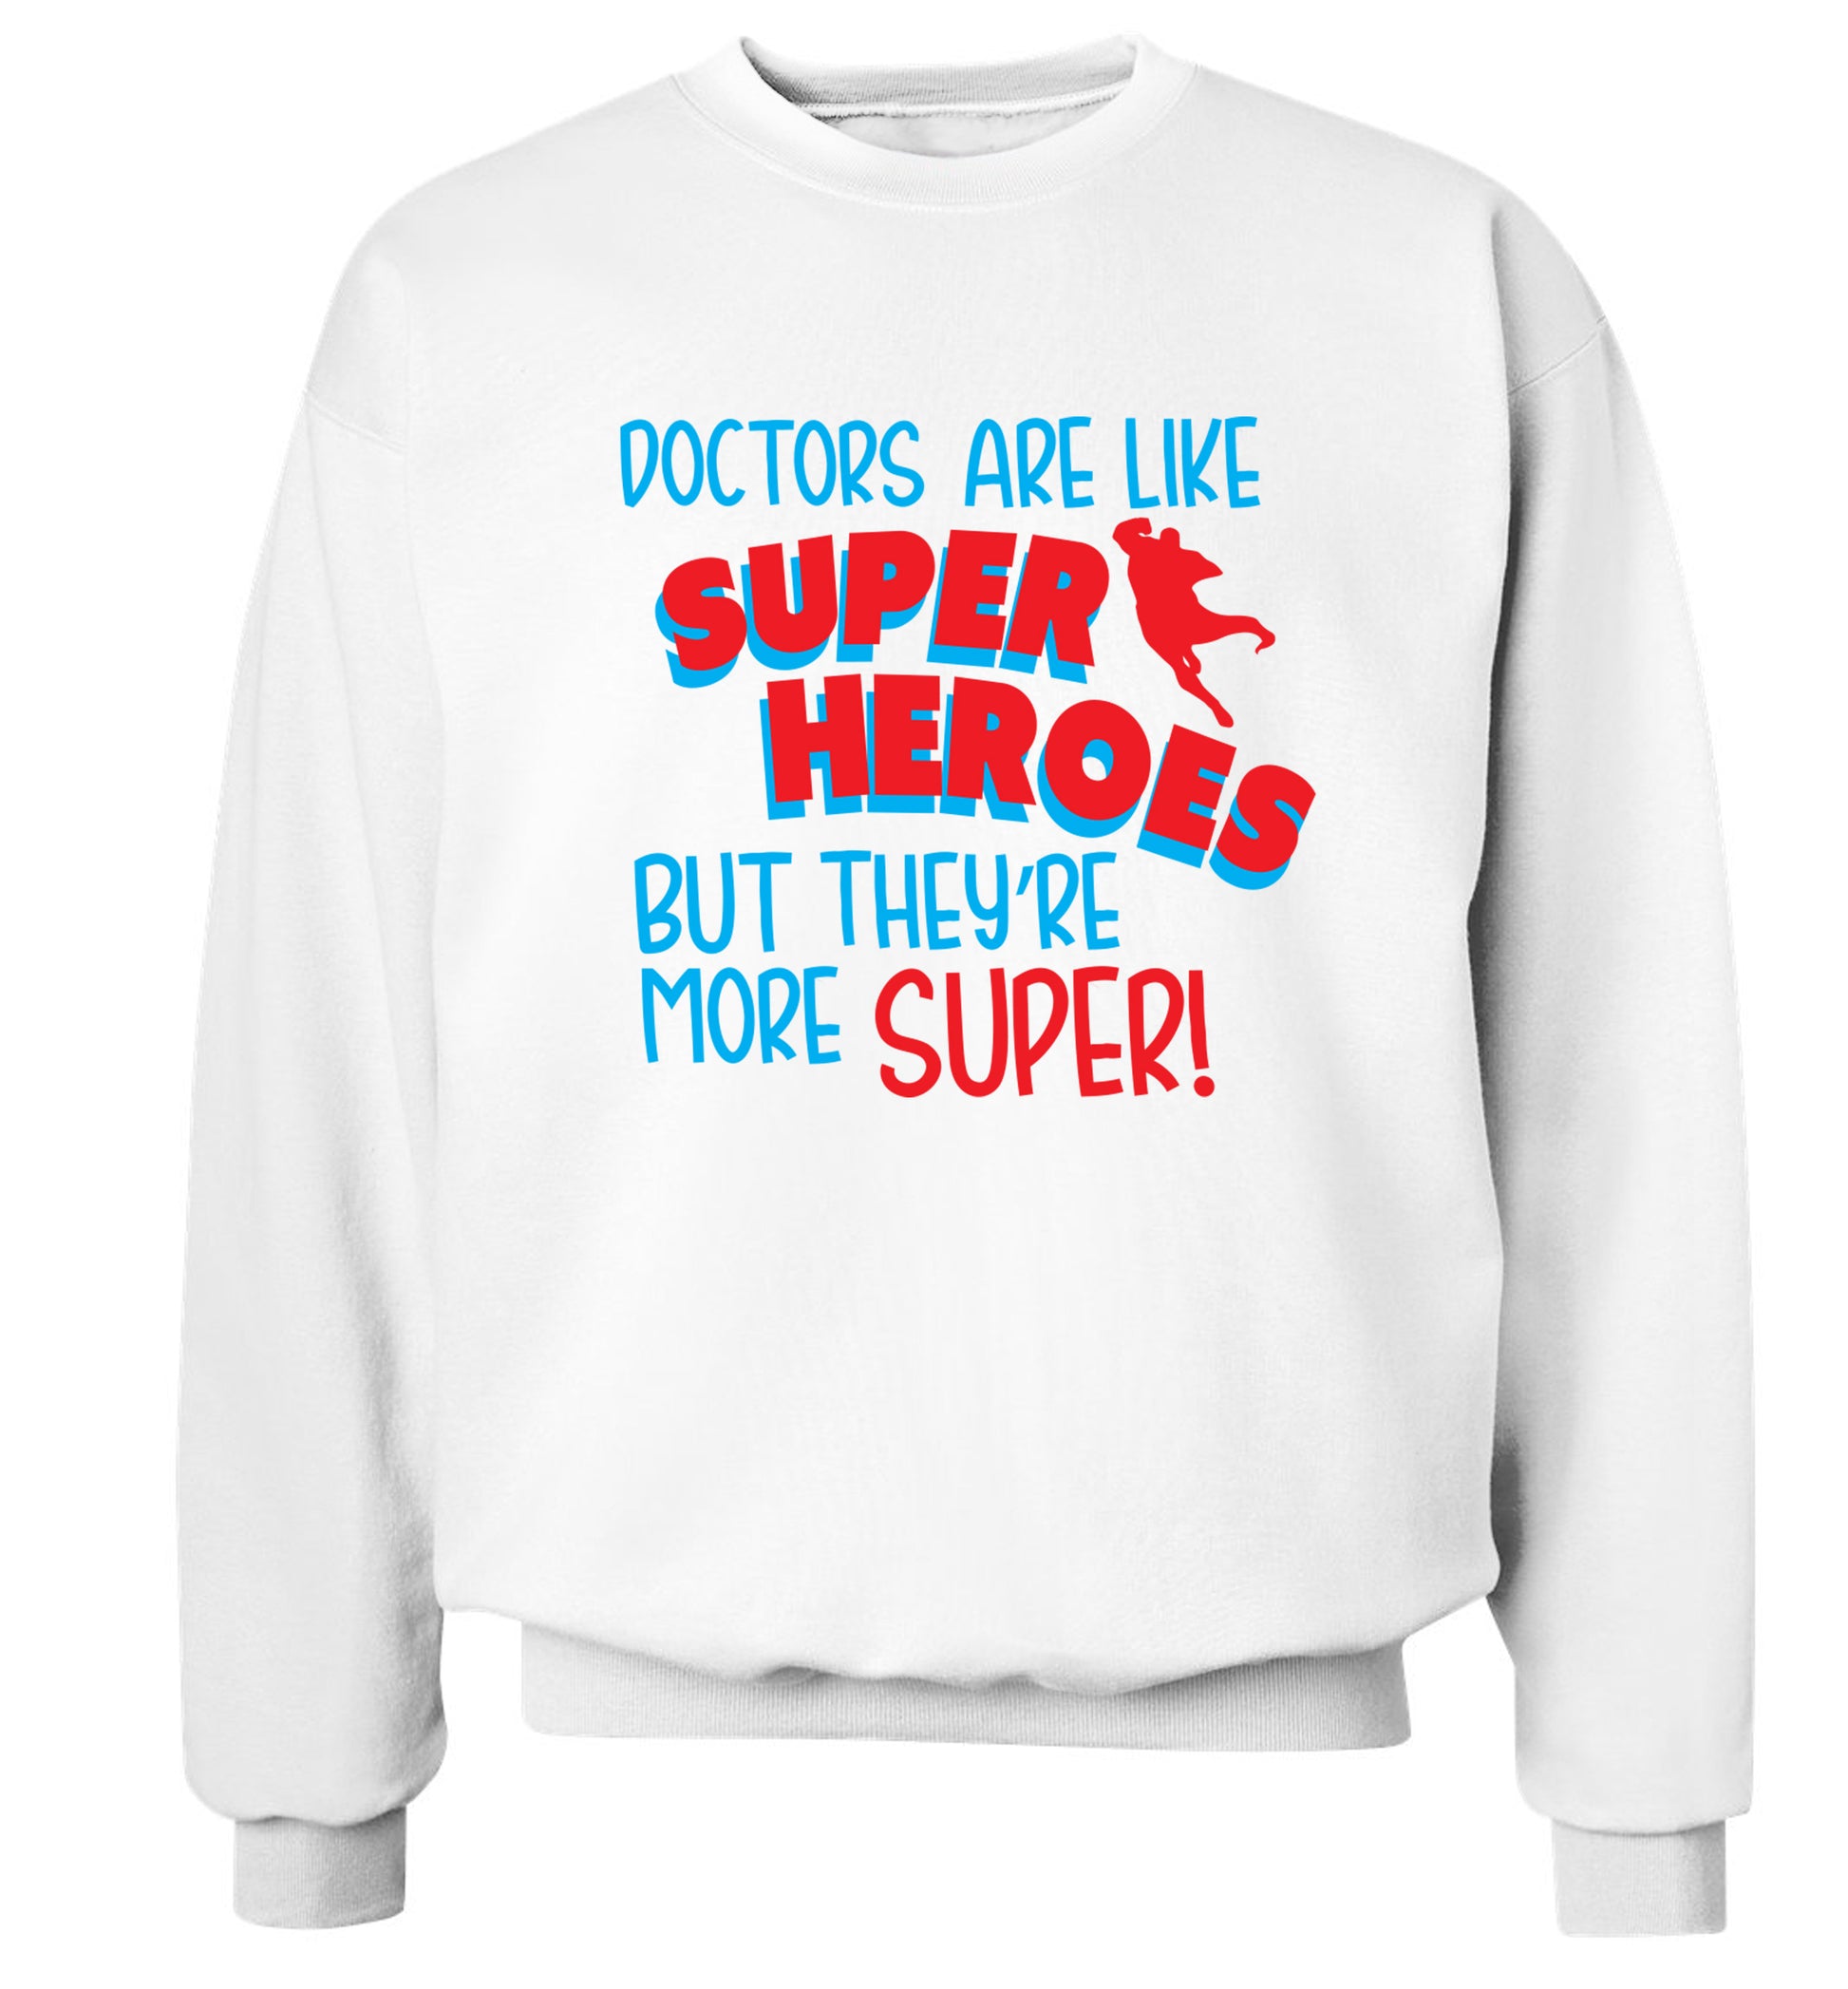 Doctors are like superheros but they're more super Adult's unisex white Sweater 2XL